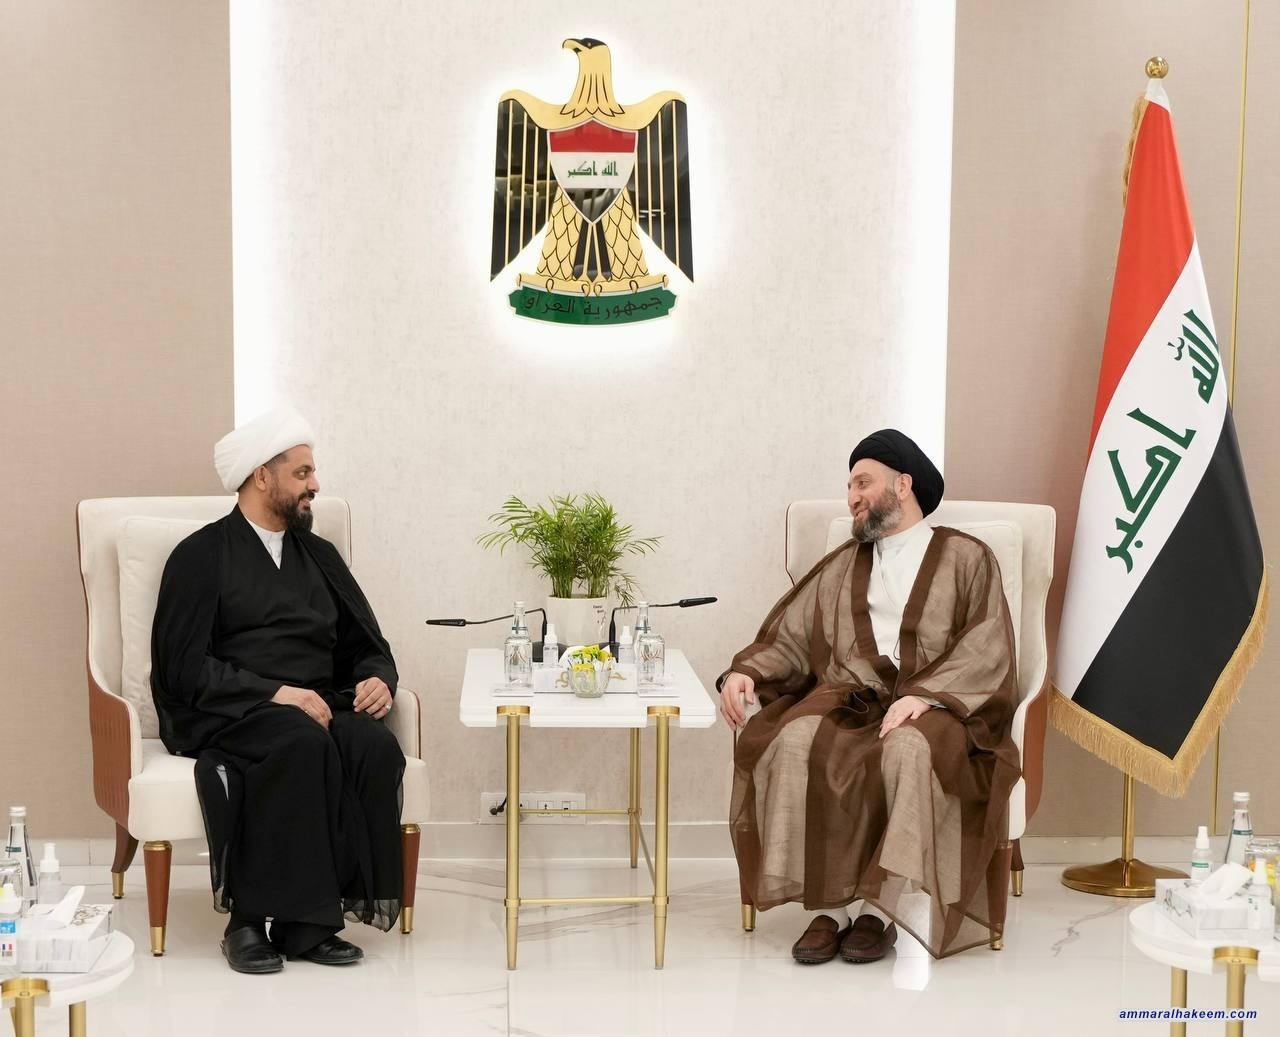 Sayyid Al-Hakeem discusses political scene developments, transition from current stability to sustainable with Sheik Al-Khazaaly